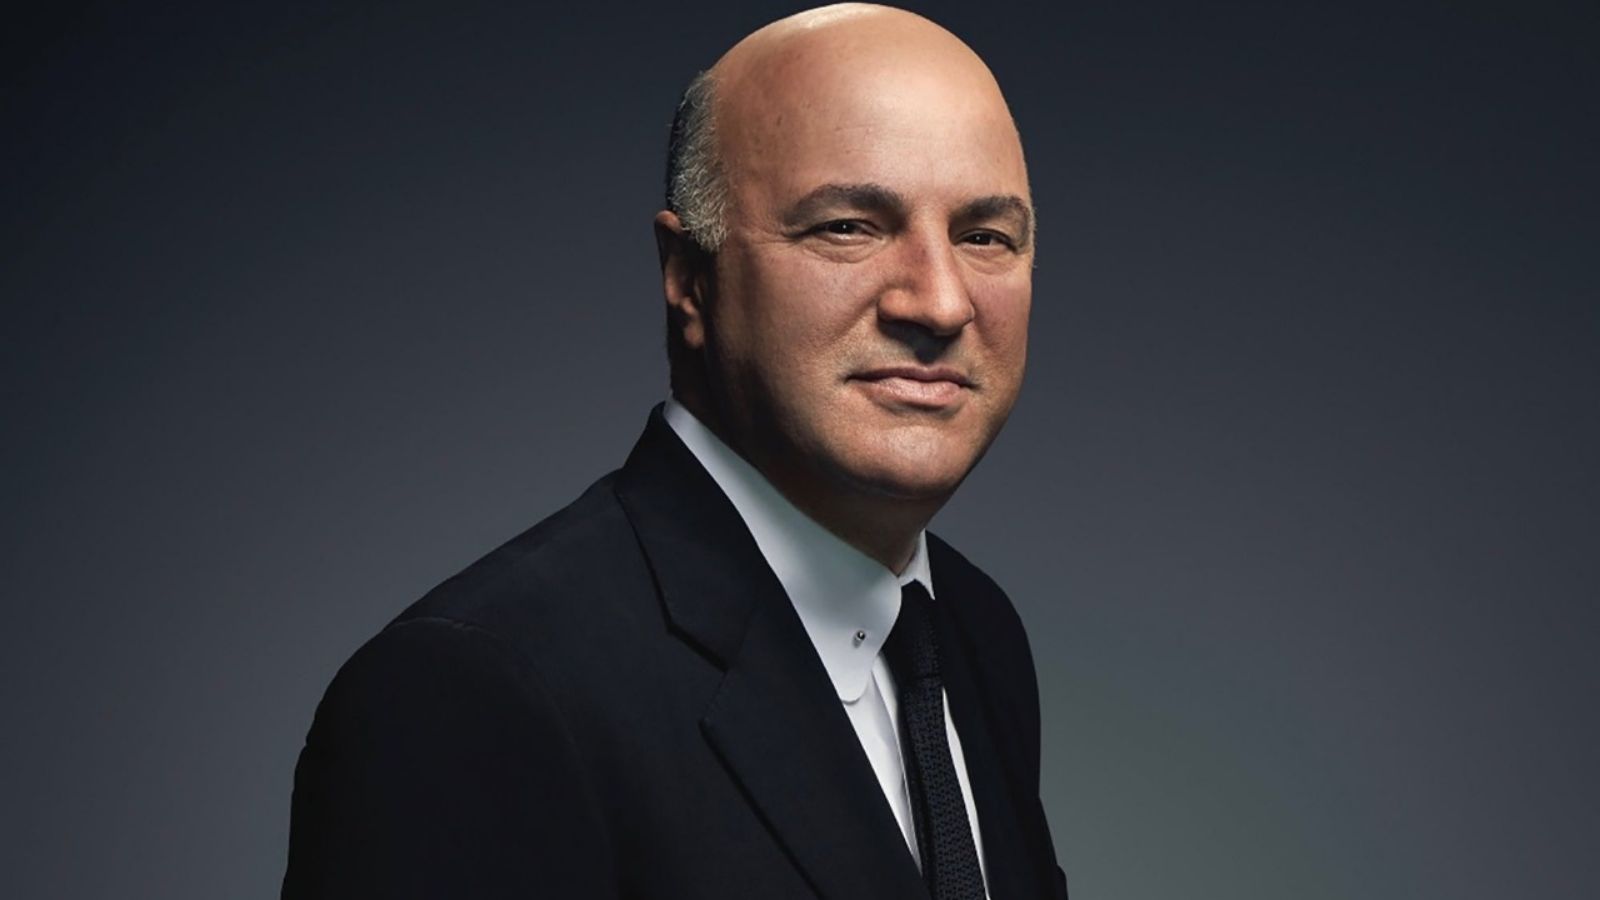 Kevin O’Leary Net Worth How Much Does The Wittiest Shark Earn?